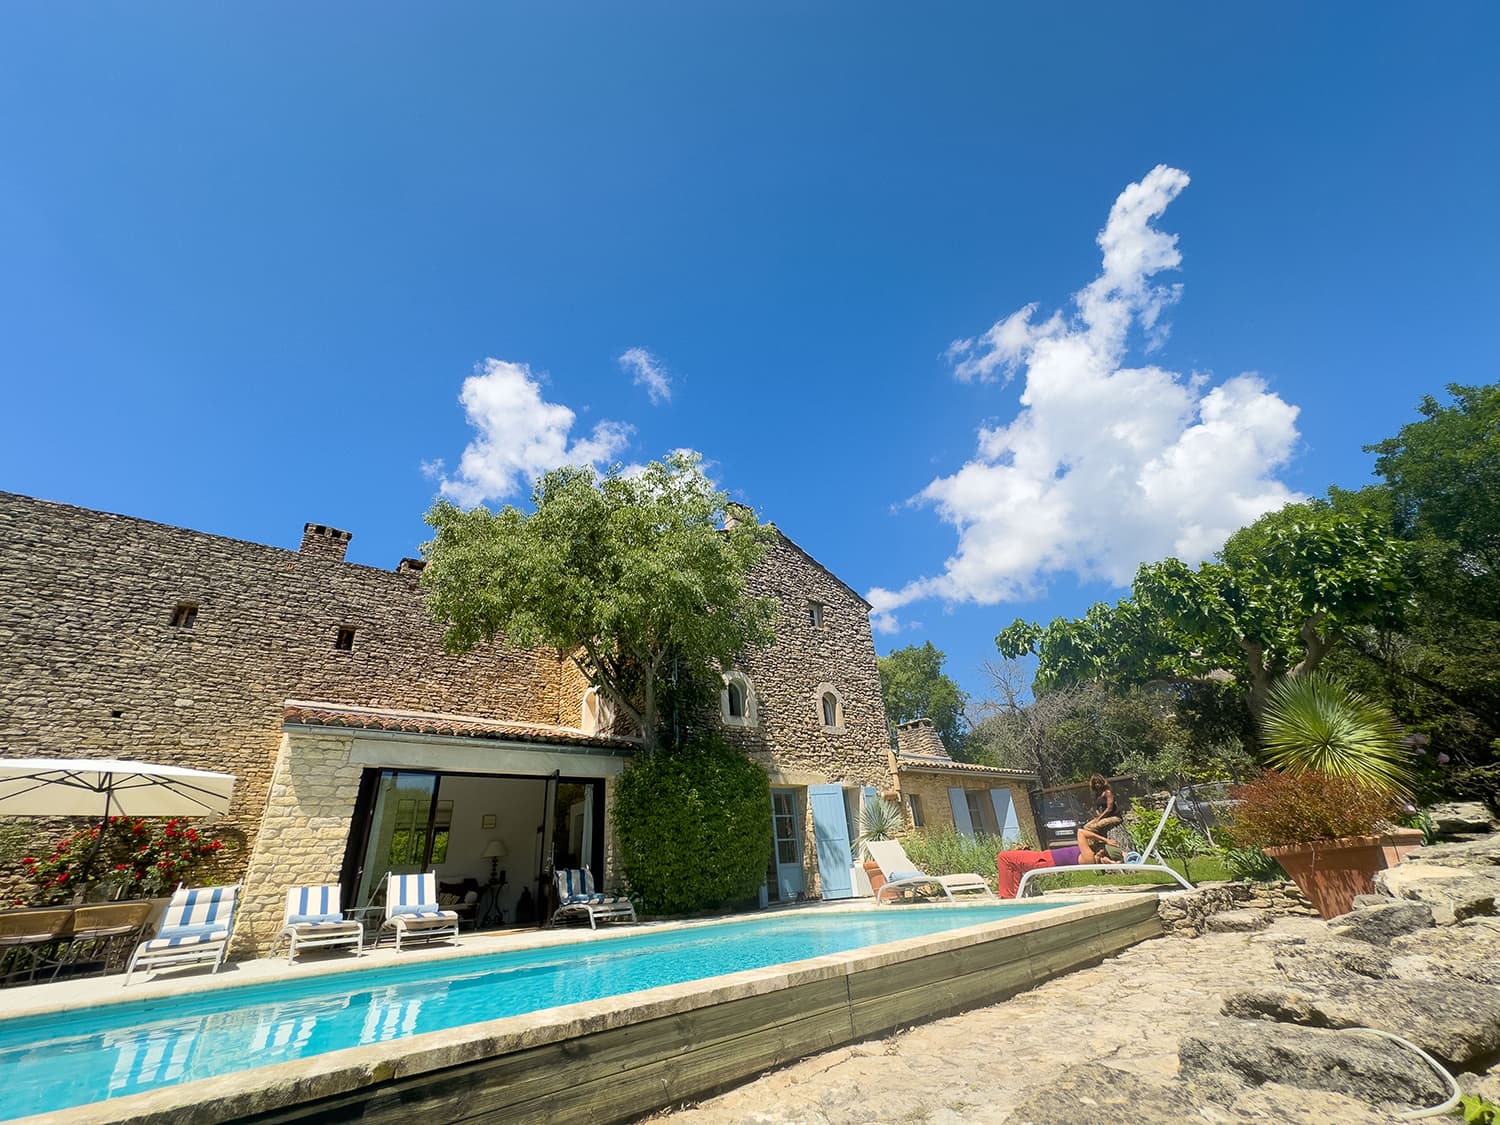 Holiday cottage near Gordes with private pool